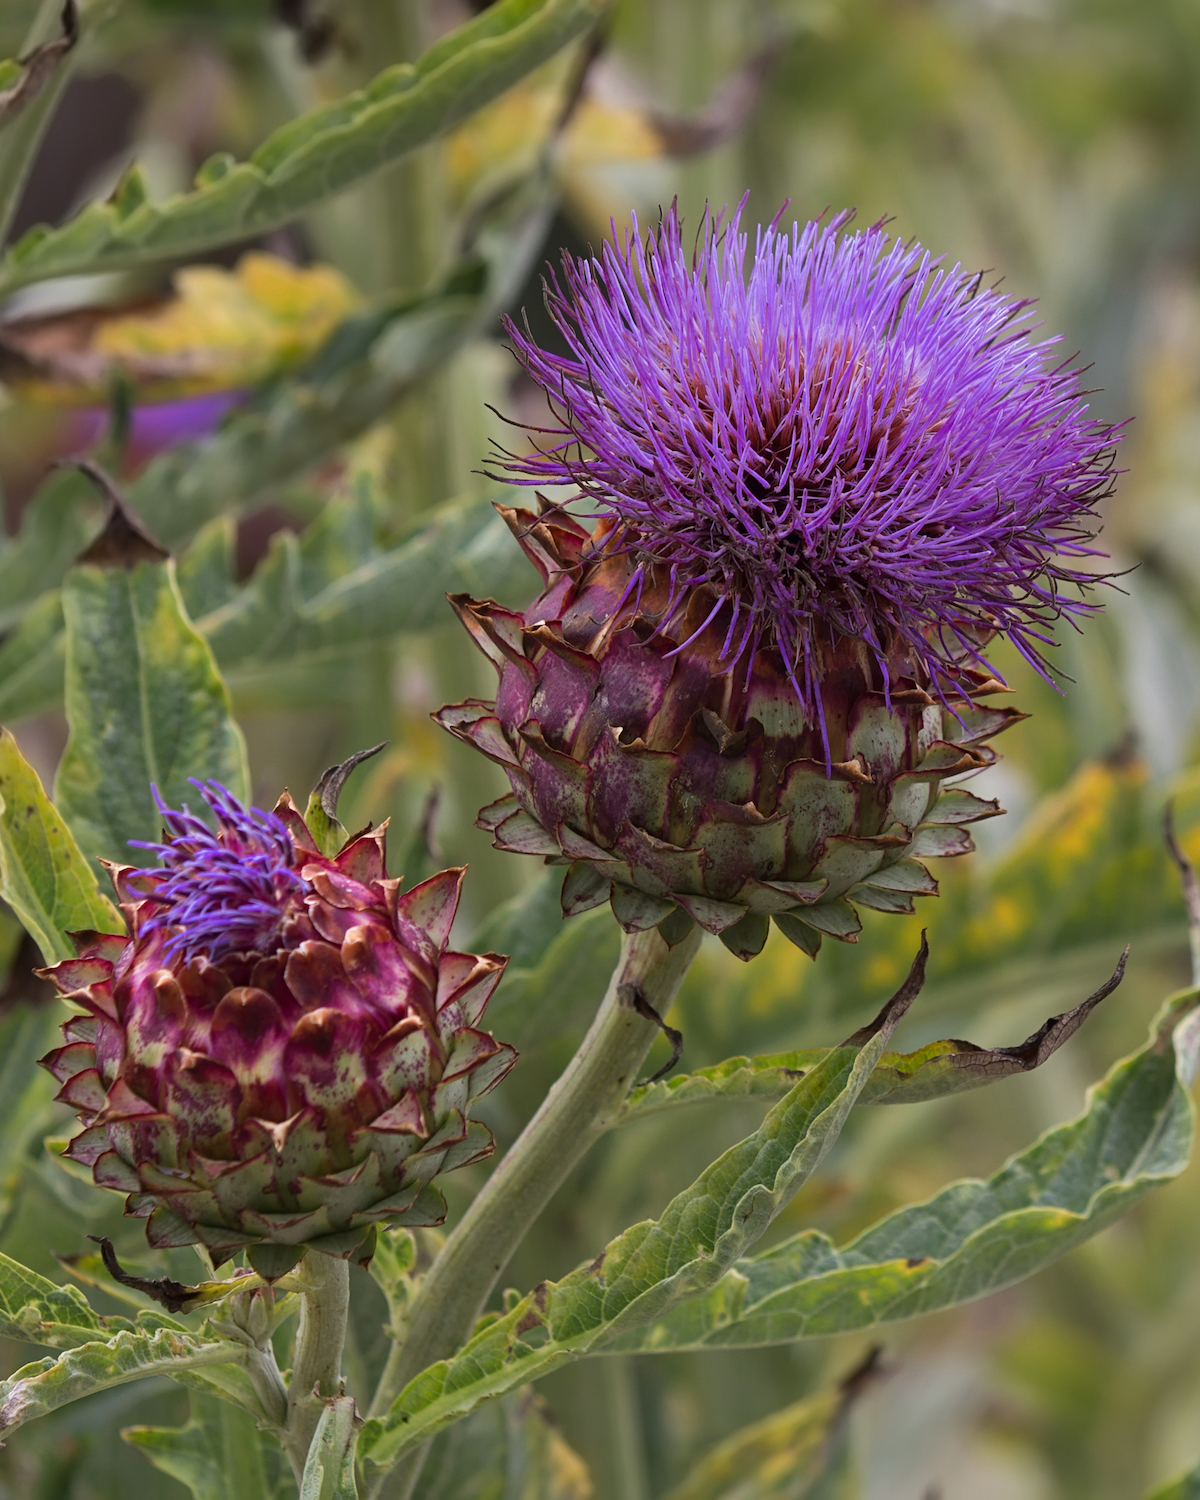 Close-up of cardoon (Cynara cardunculus) plant with flower and bud